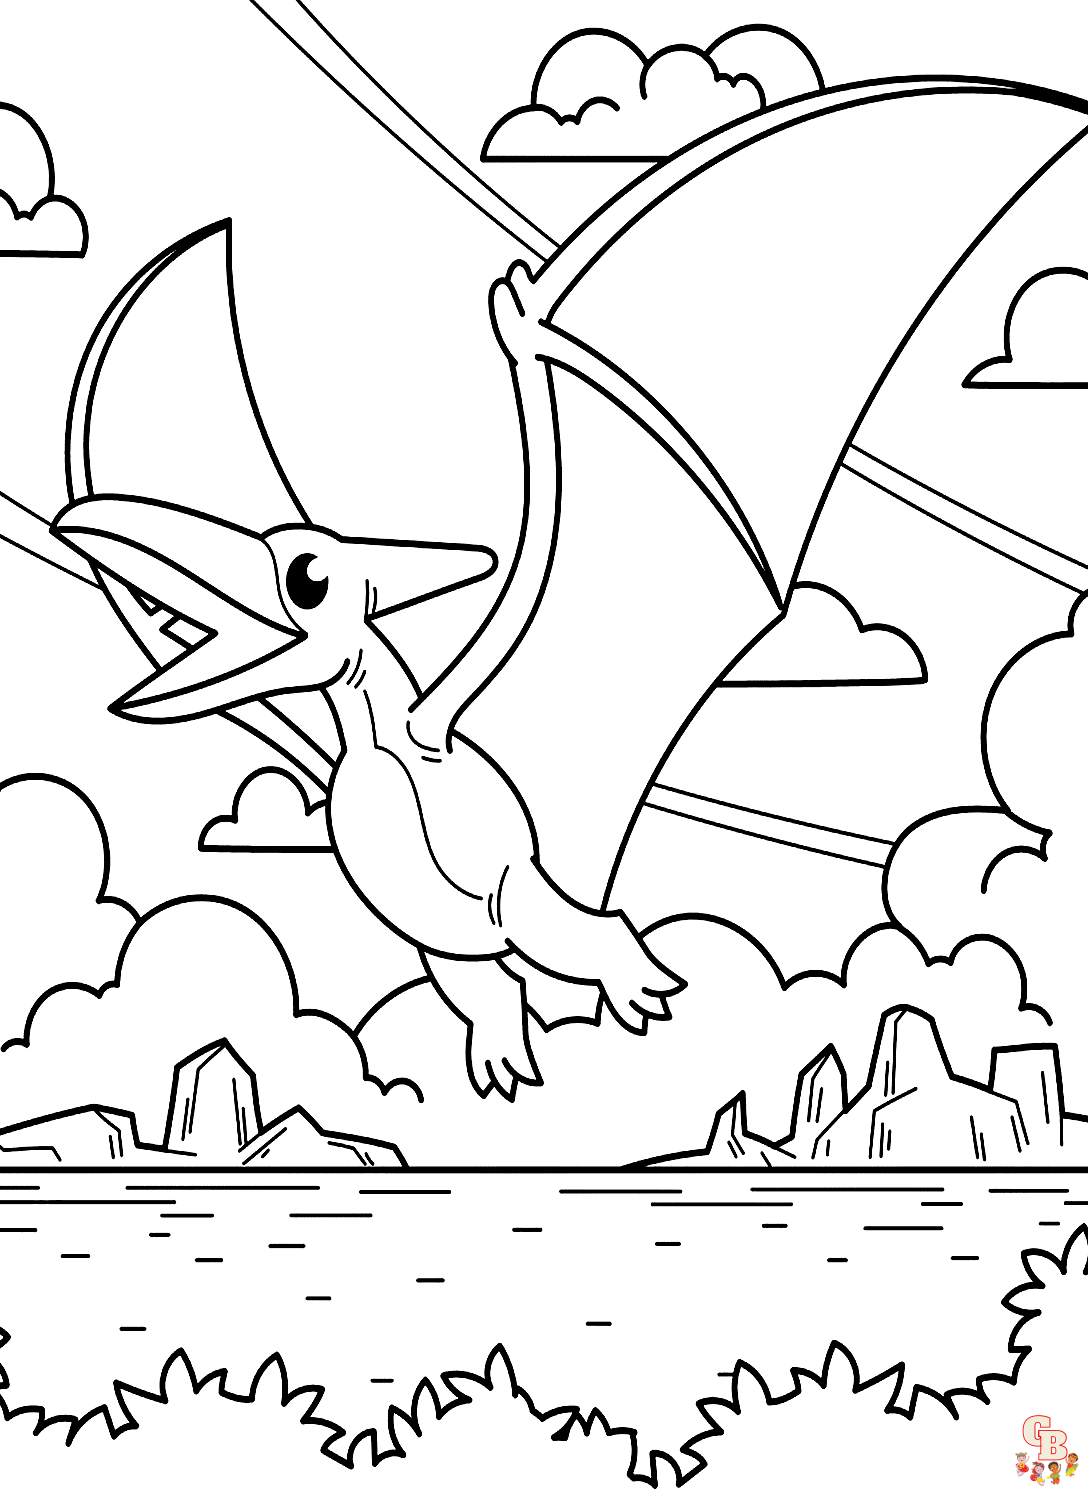 Pteranodon coloring pages printable free